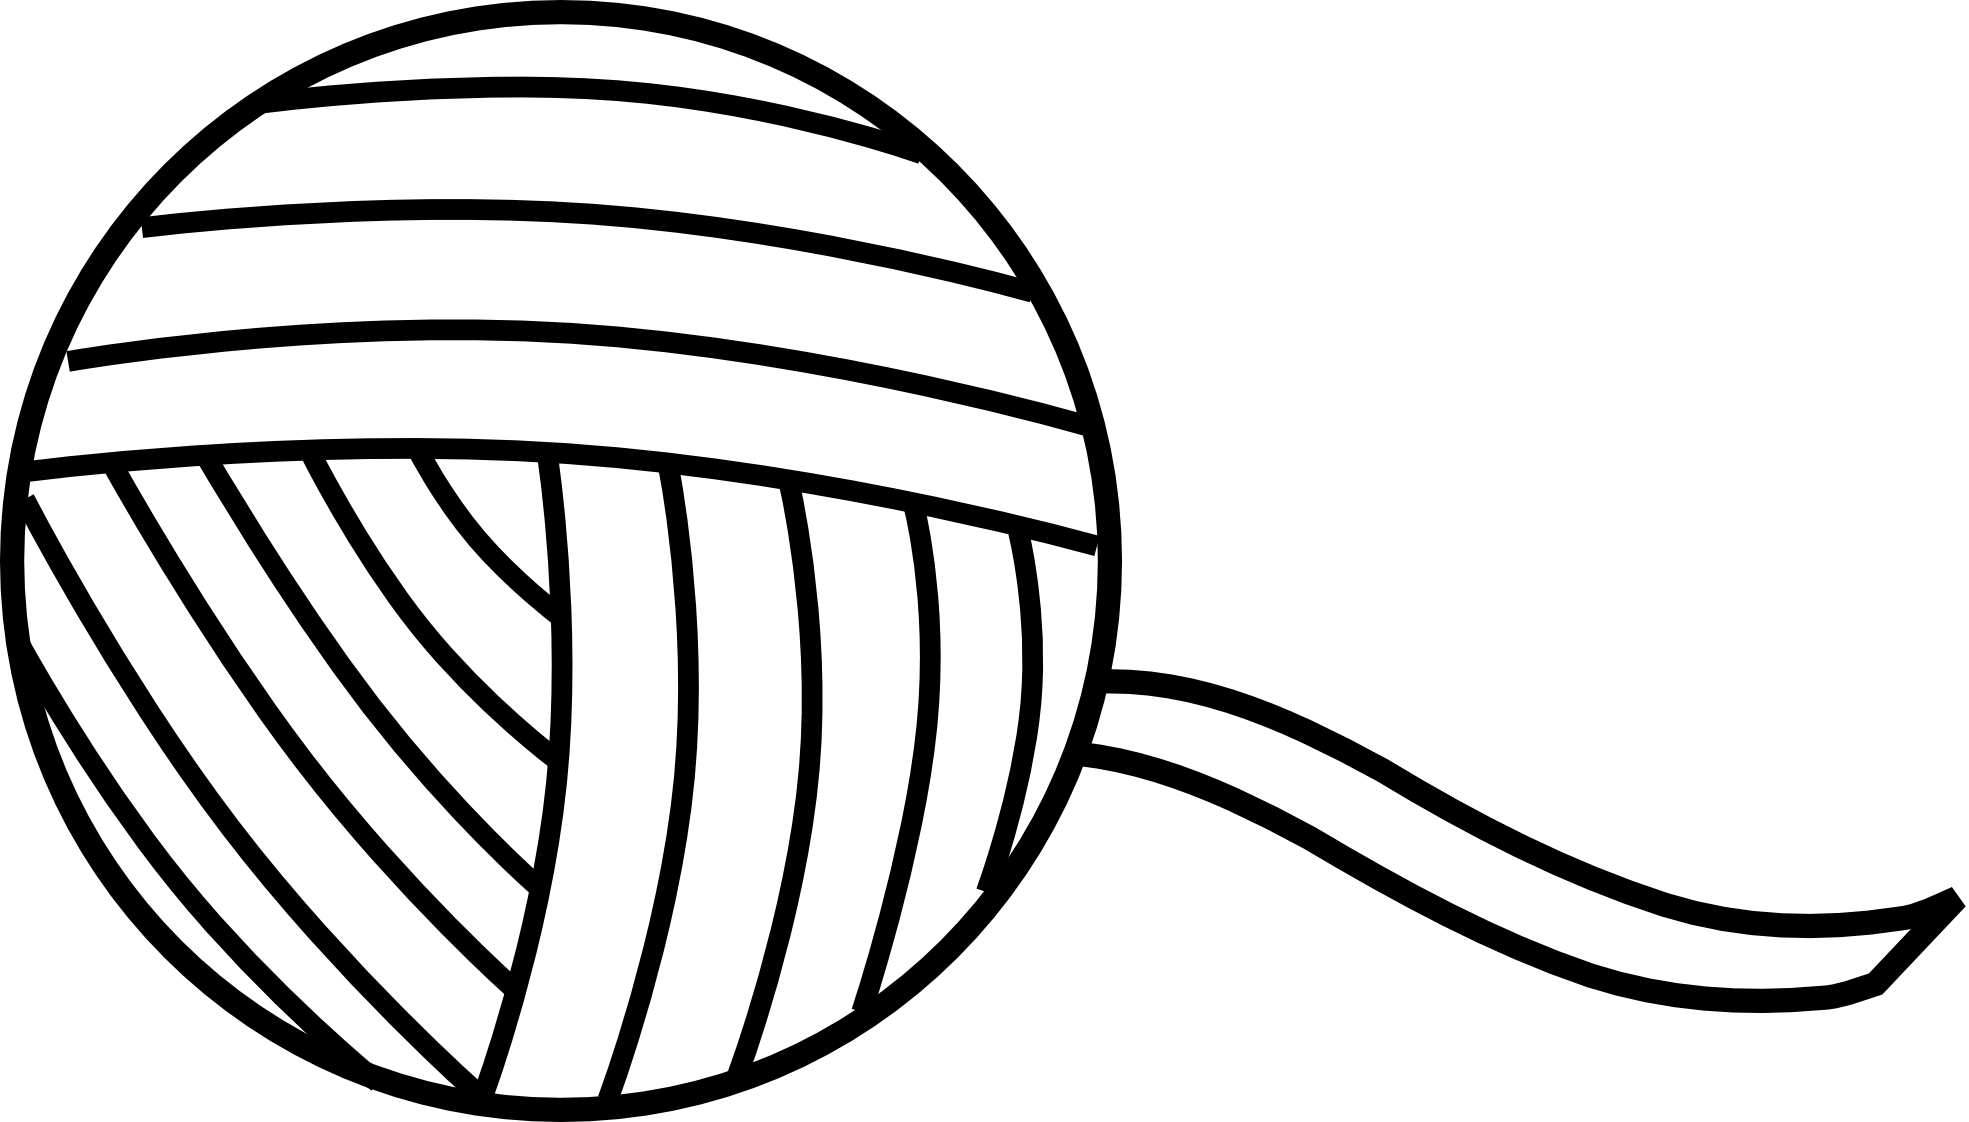 Clip Art Black And White Ball Of Yarn Clipart